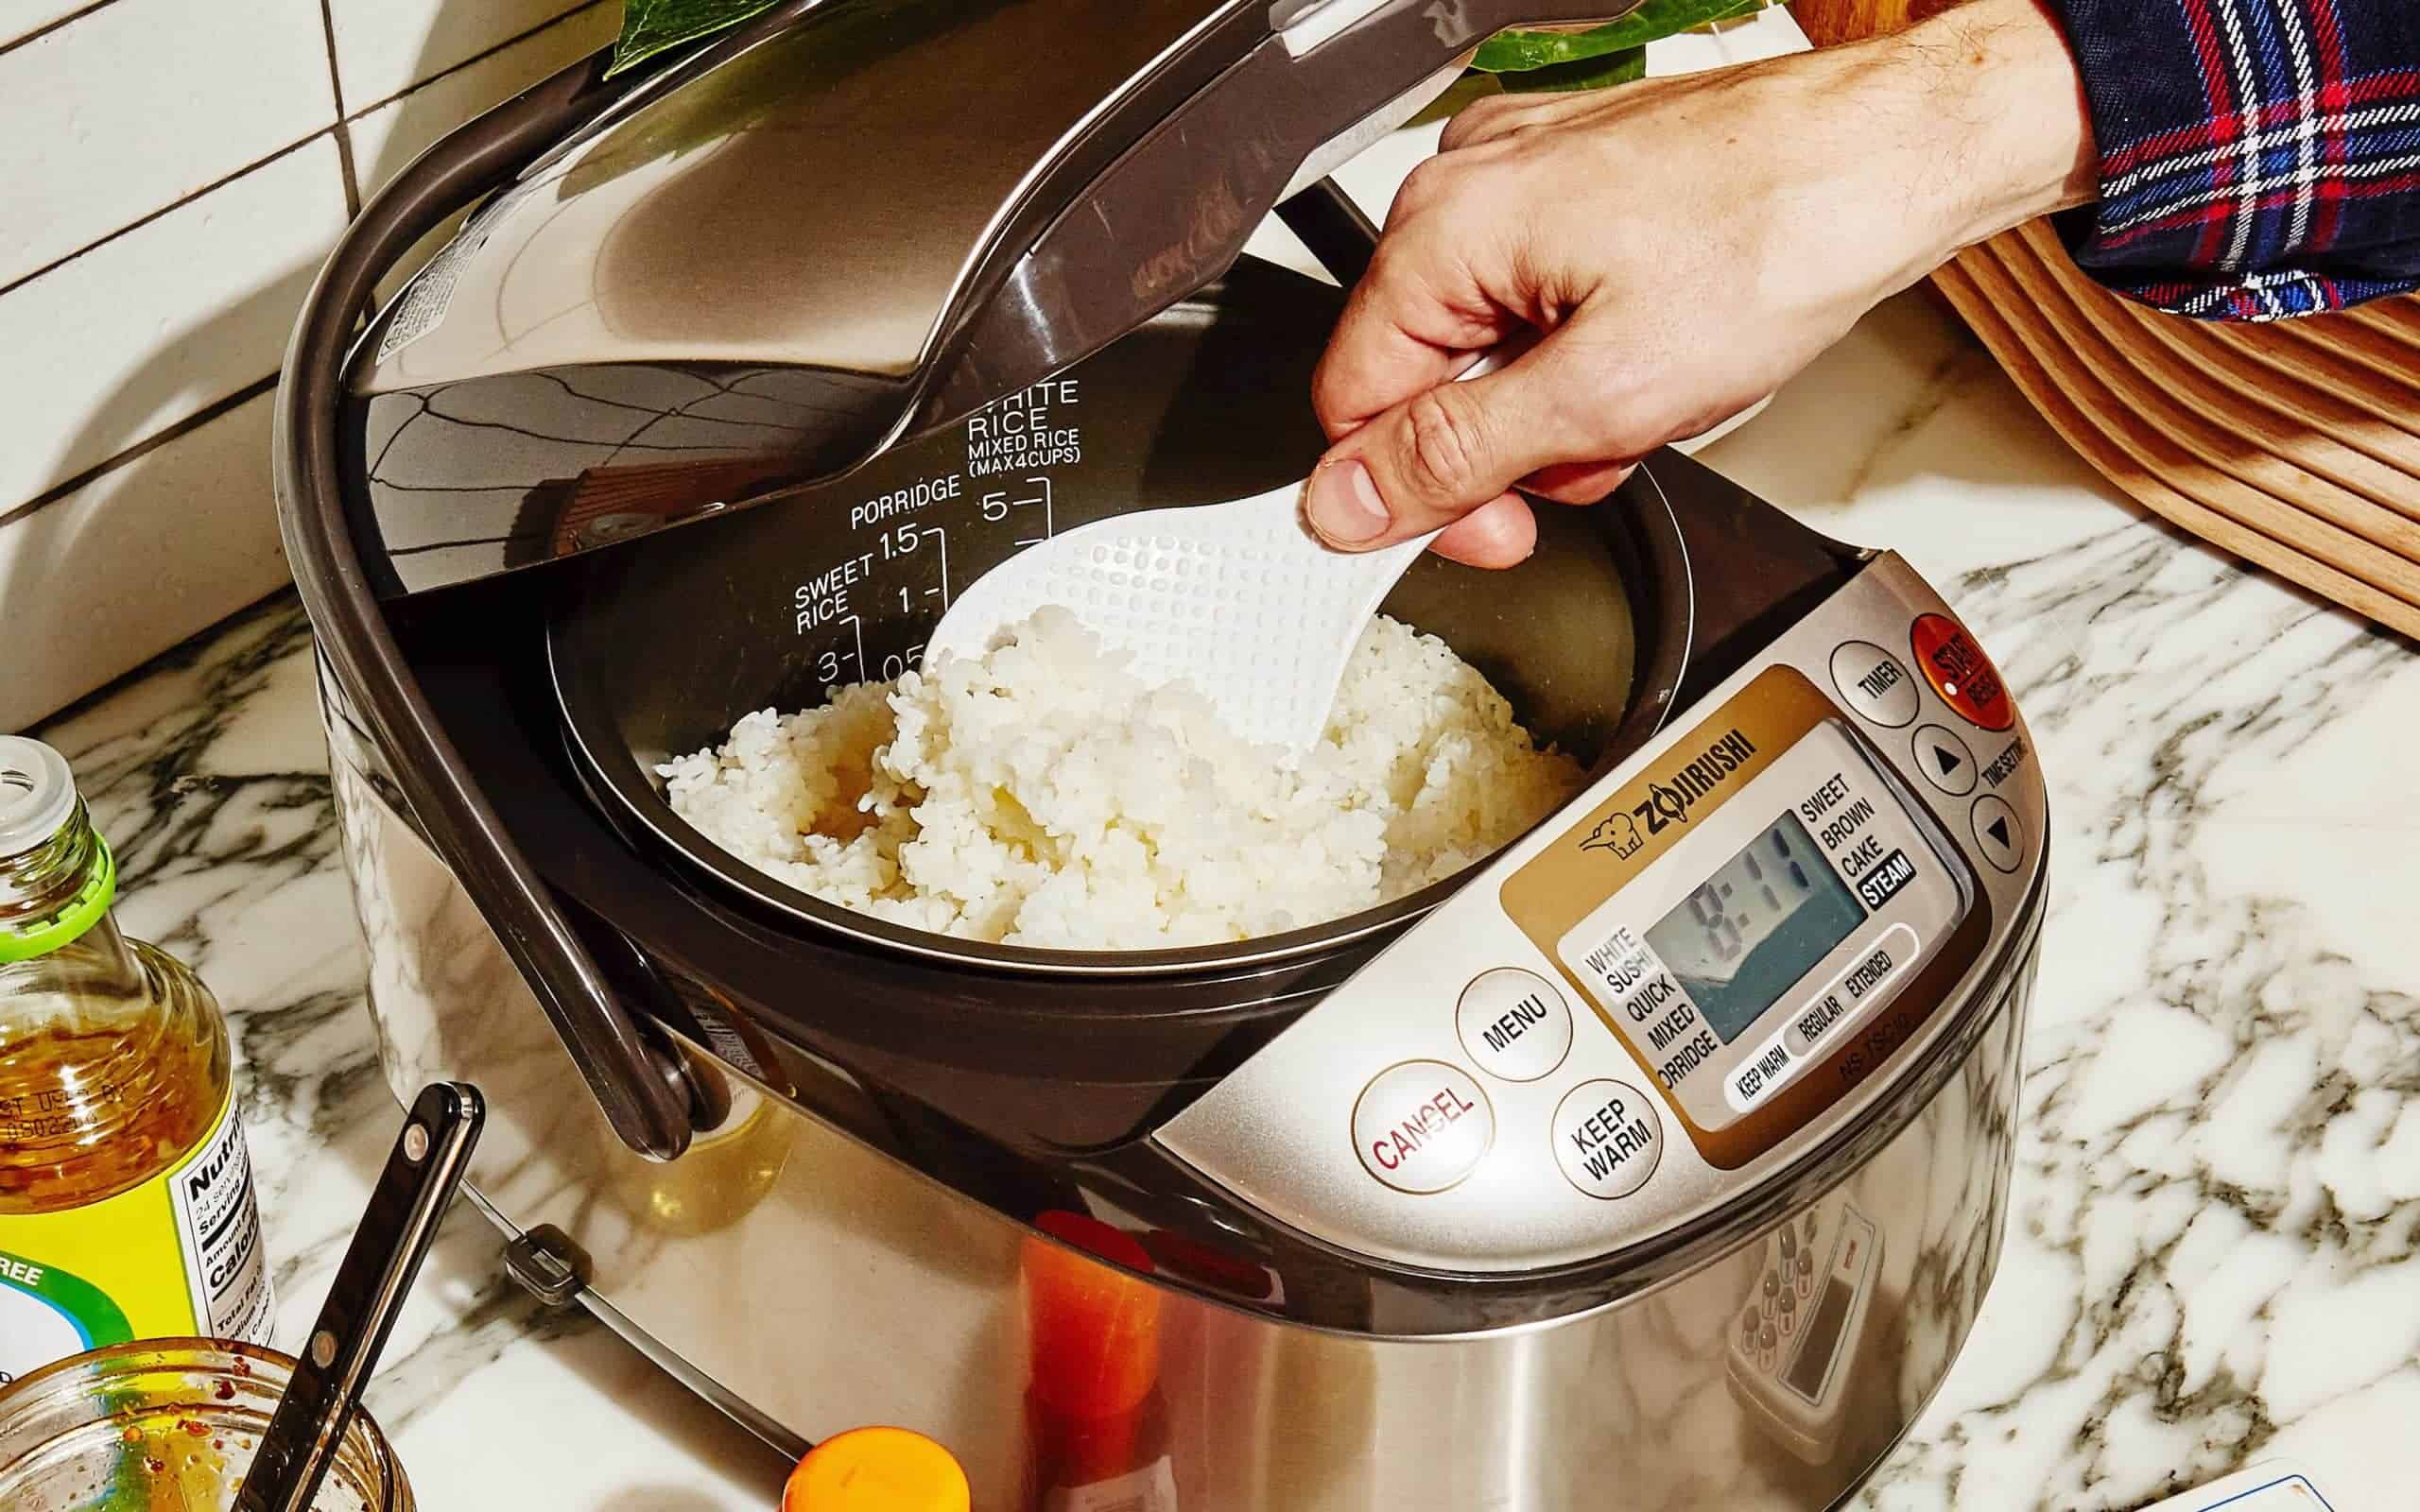 How Does a Rice Cooker Work Without Burning Food?